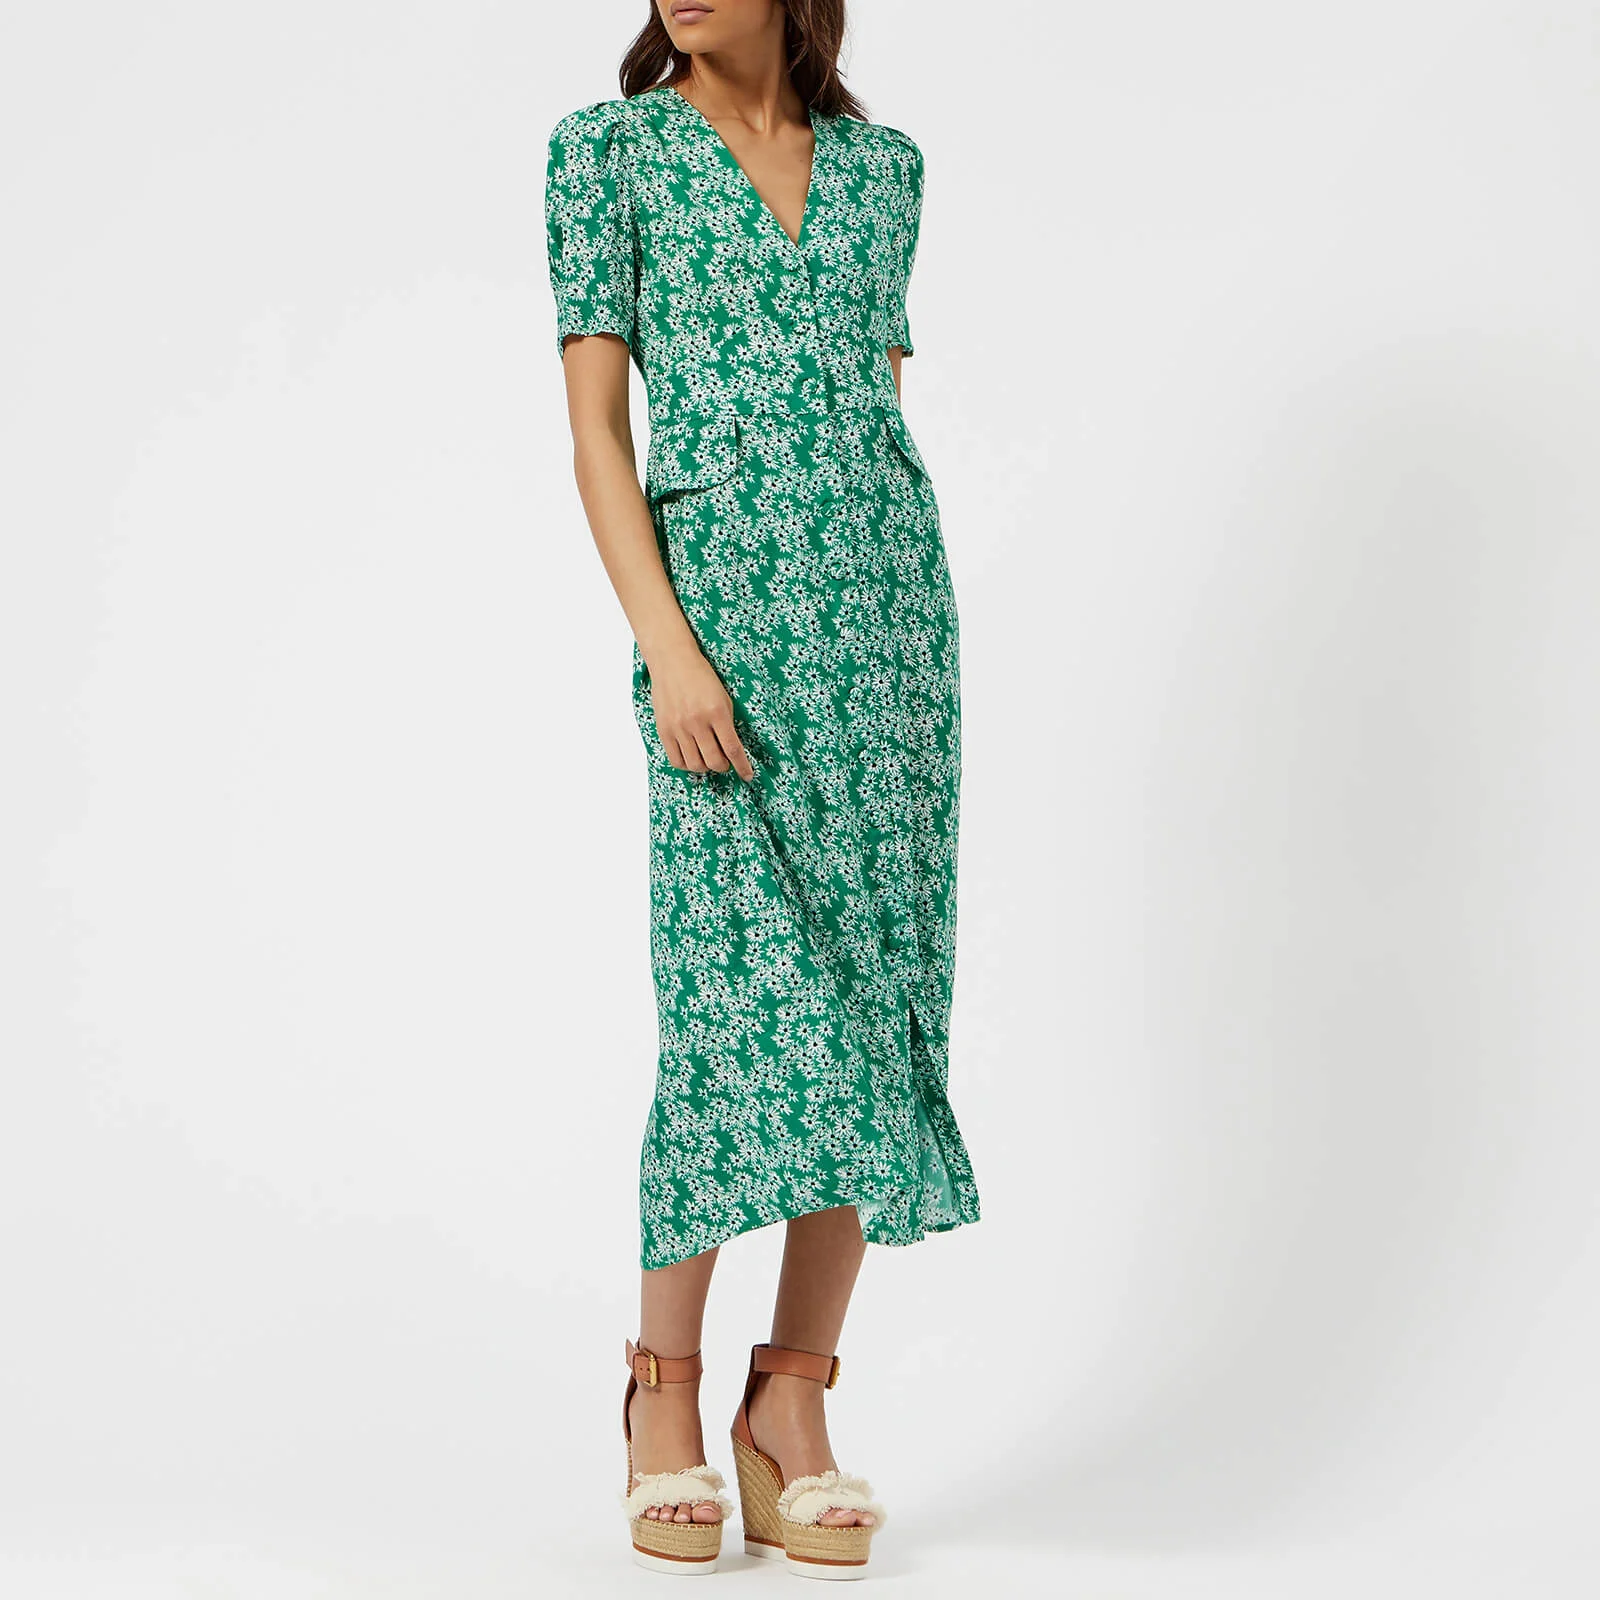 RIXO Women's Jackson Midi Dress with Pocket Detail and Buttons - Daisy Dream/Green Image 1